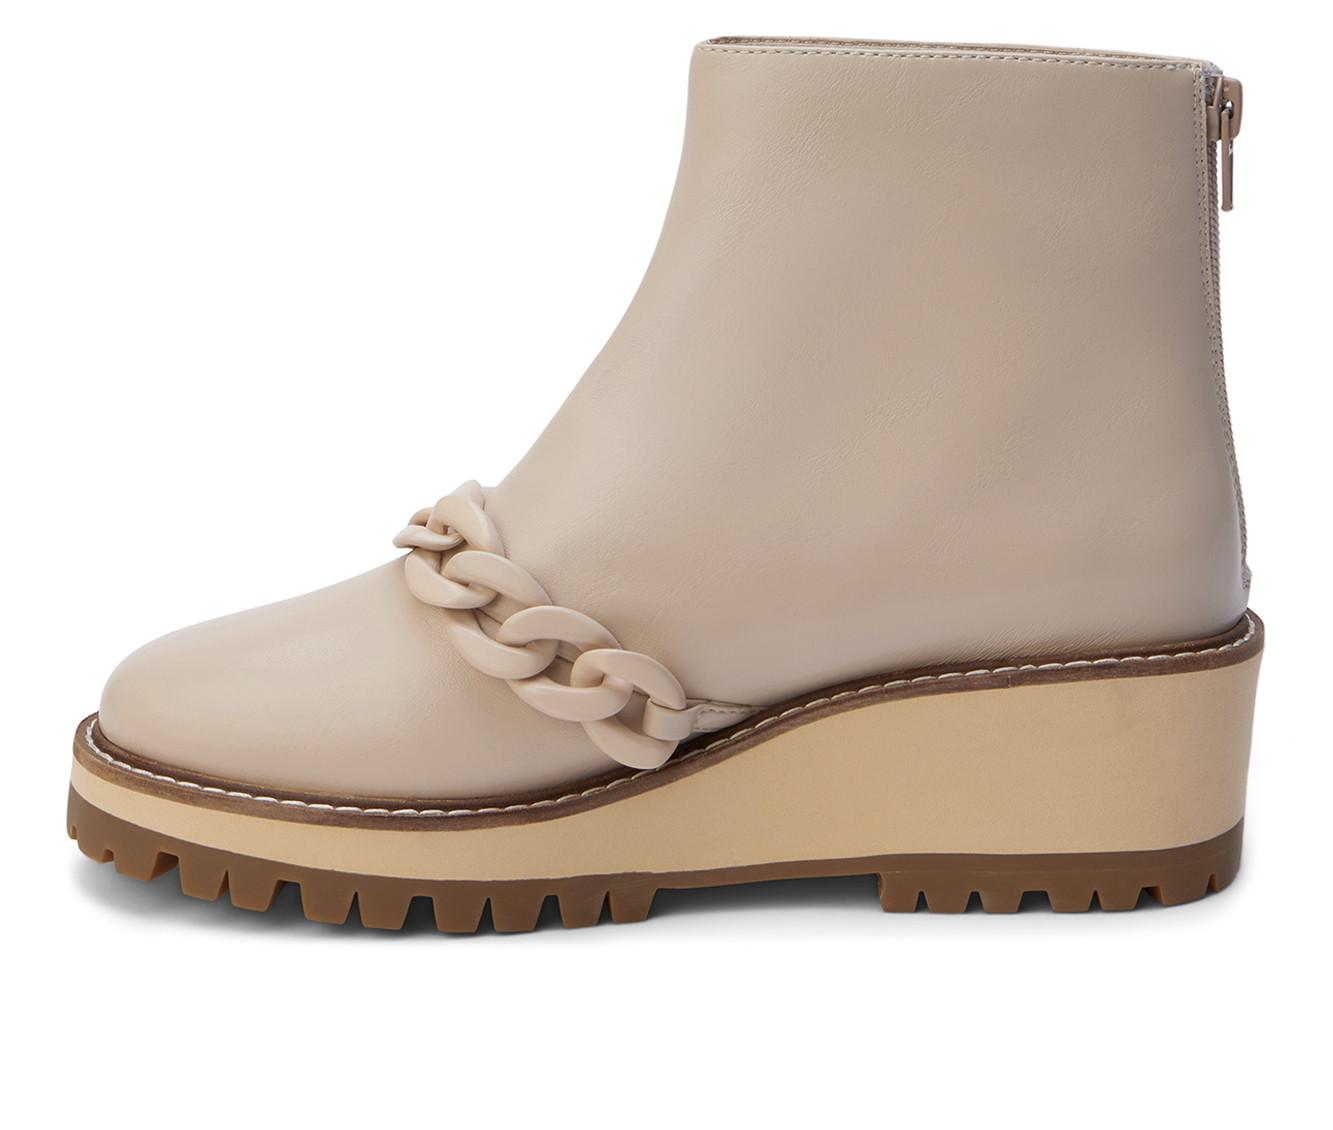 Women's Coconuts by Matisse Sycamore Booties